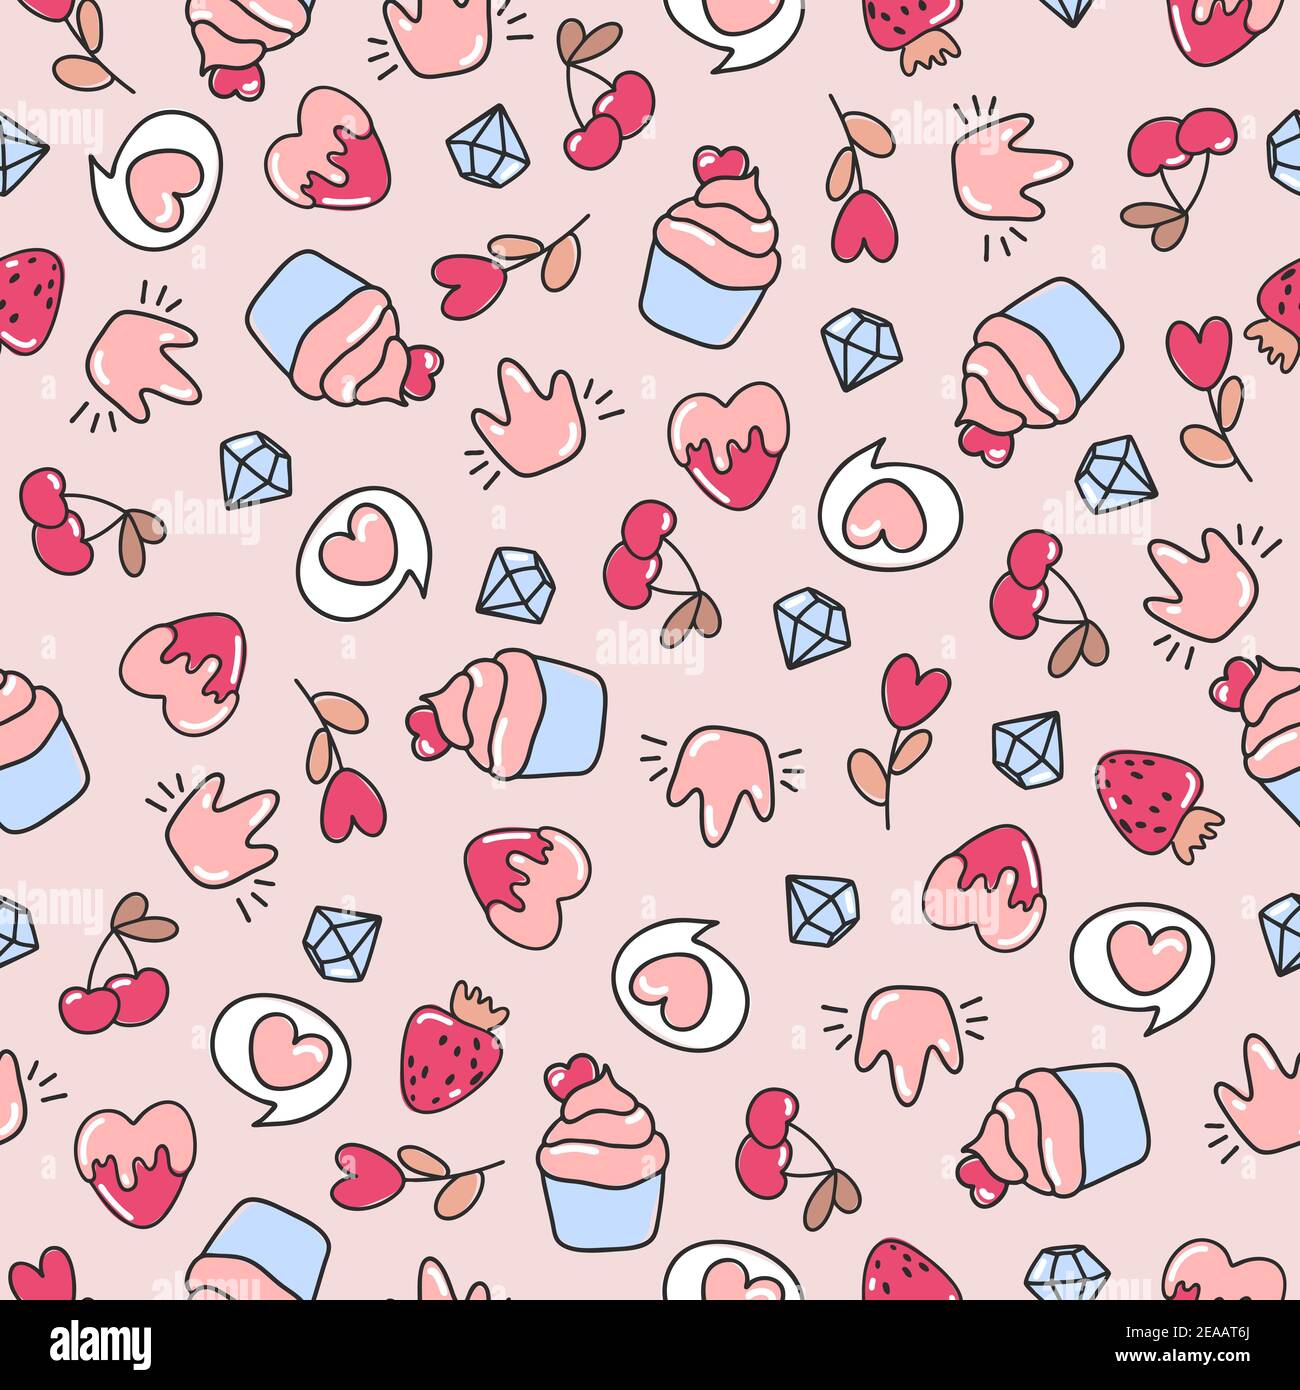 Seamless doodle love pattern.Vector illustration. Valentines Day. Hearts, cupcakes, sweets, love and berries. Pastel pink, blue and beige background. Stock Vector